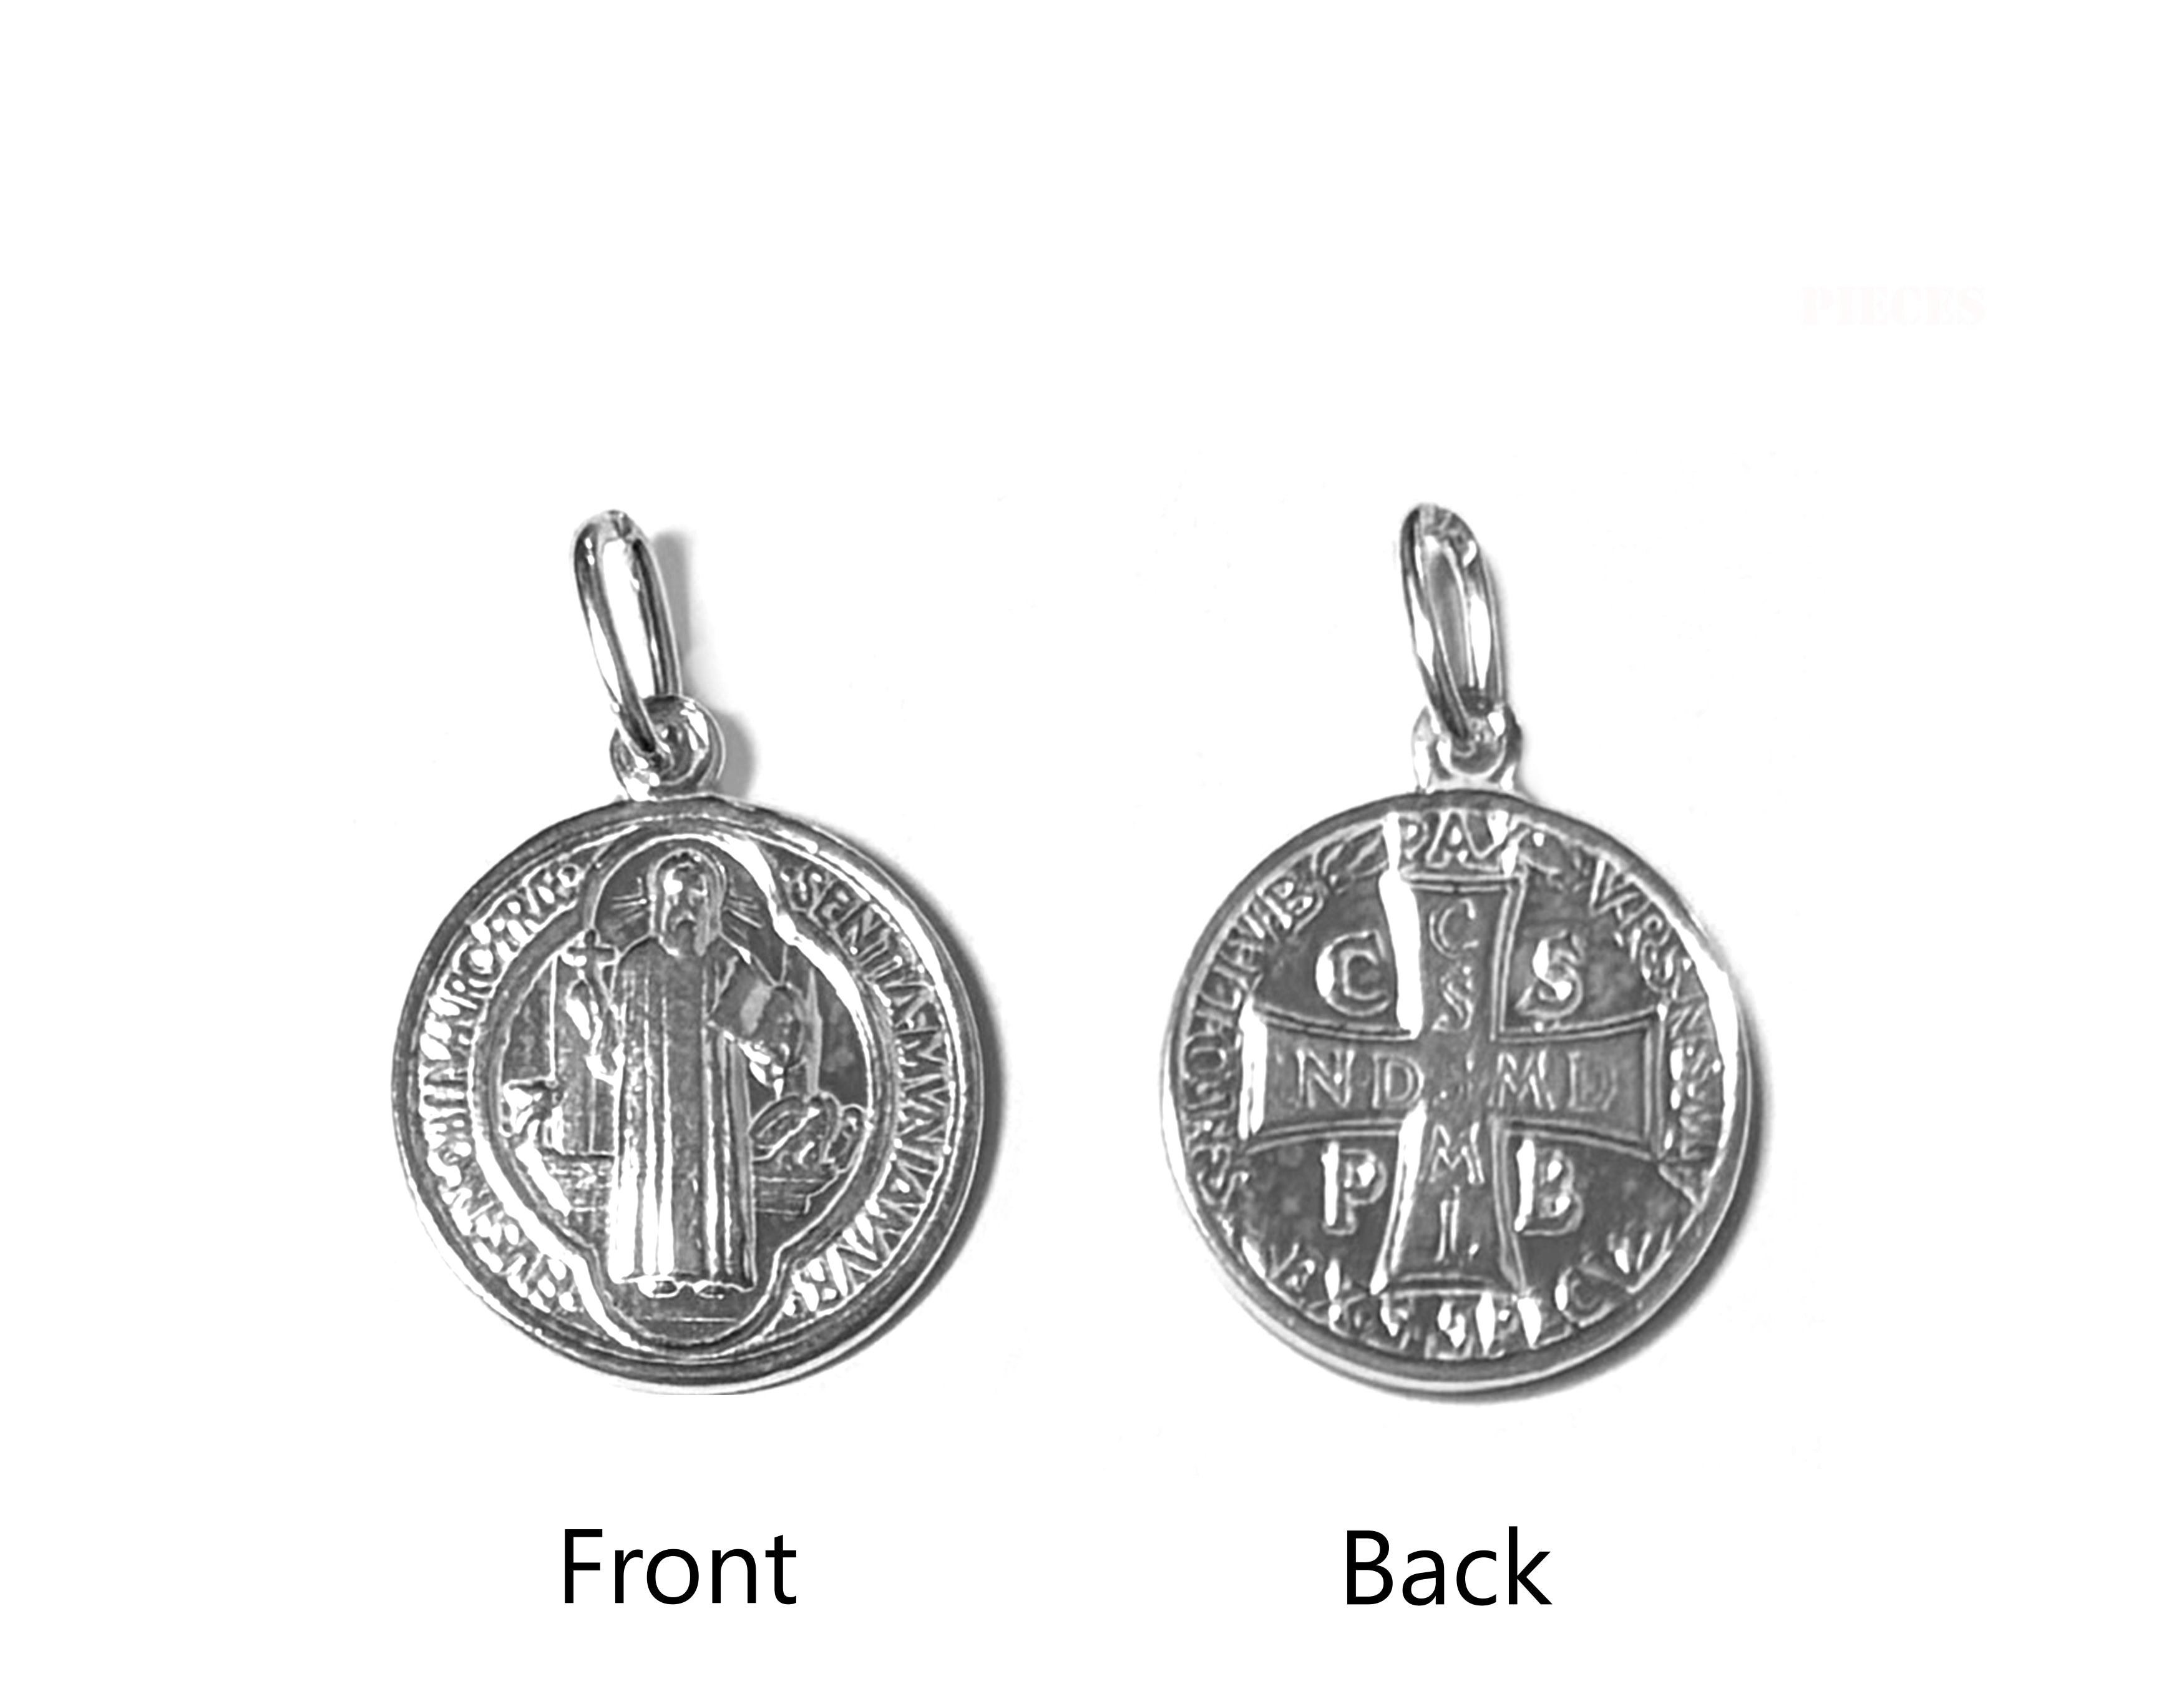 Sterling silver medals made in Colombia